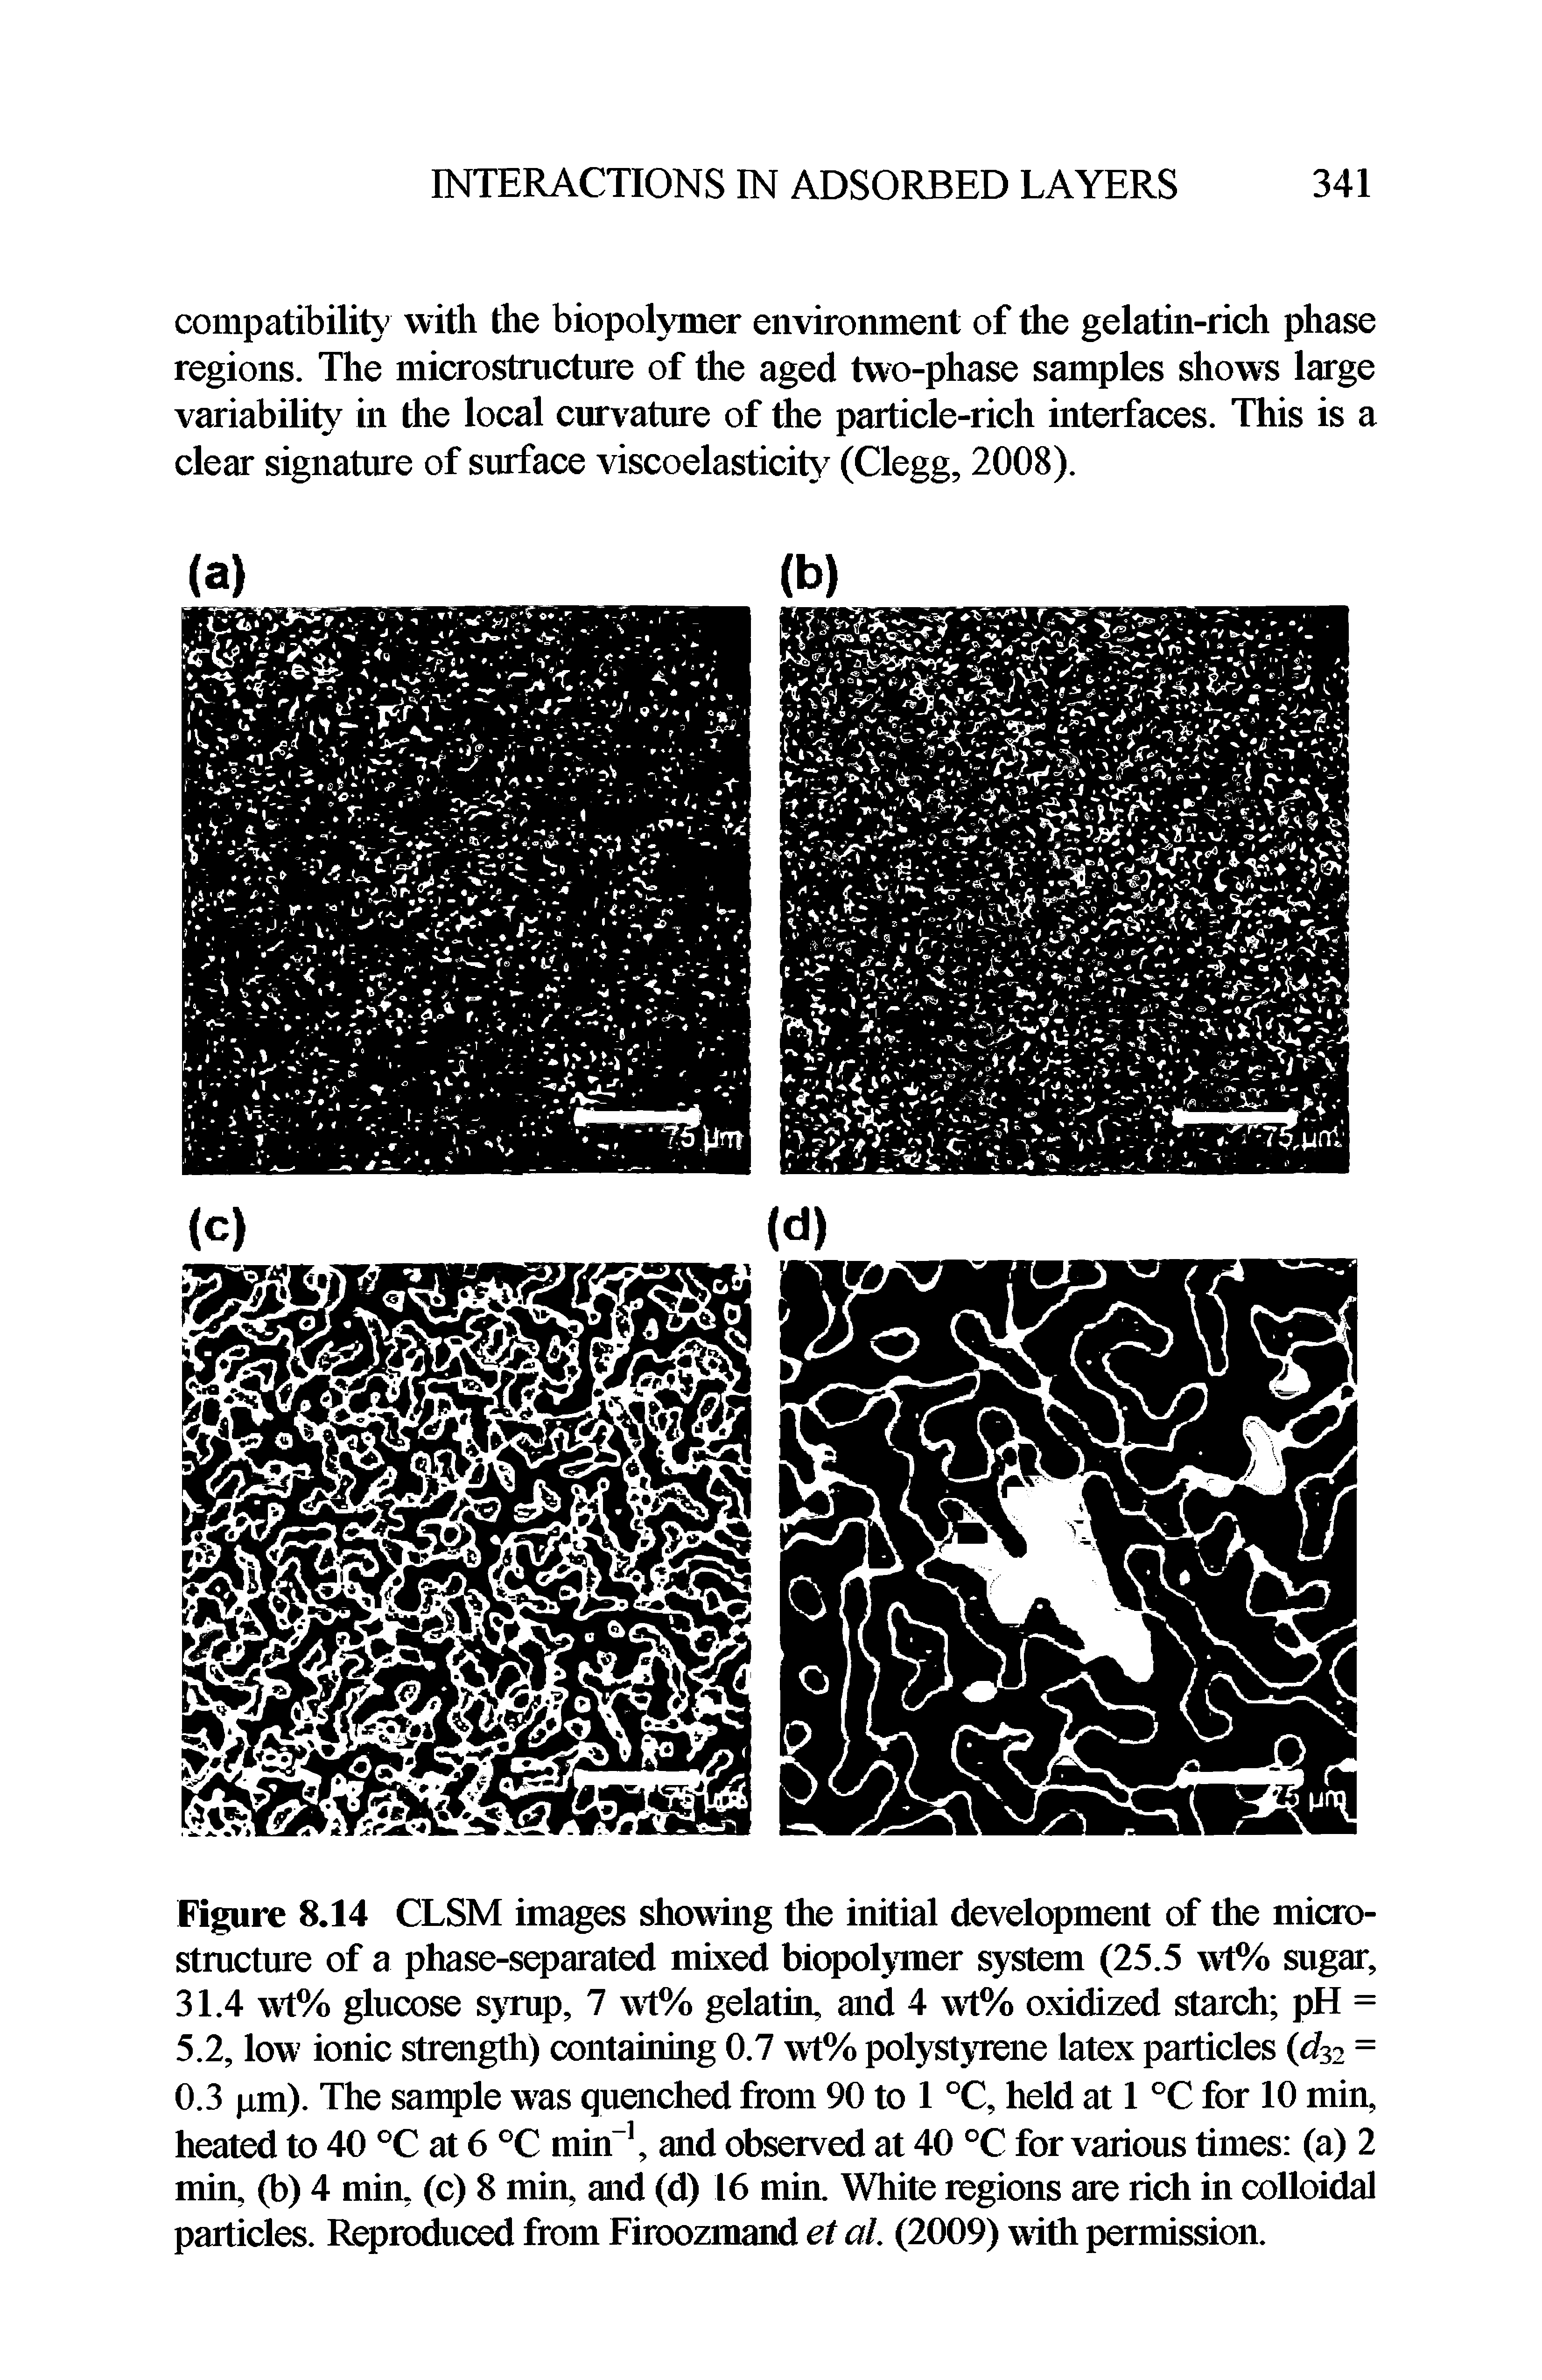 Figure 8.14 CLSM images showing the initial development of the microstructure of a phase-separated mixed biopolymer system (25.5 wt% sugar, 31.4 wt% glucose syrup, 7 wt% gelatin, and 4 wt% oxidized starch pH = 5.2, low ionic strength) containing 0.7 wt% polystyrene latex particles (d32 = 0.3 pm). The sample was quenched from 90 to 1 °C, held at 1 °C for 10 min, heated to 40 °C at 6 °C min-1, and observed at 40 °C for various times (a) 2 min, (b) 4 min, (c) 8 min, and (d) 16 min. White regions are rich in colloidal particles. Reproduced from Firoozmand et ai (2009) with permission.